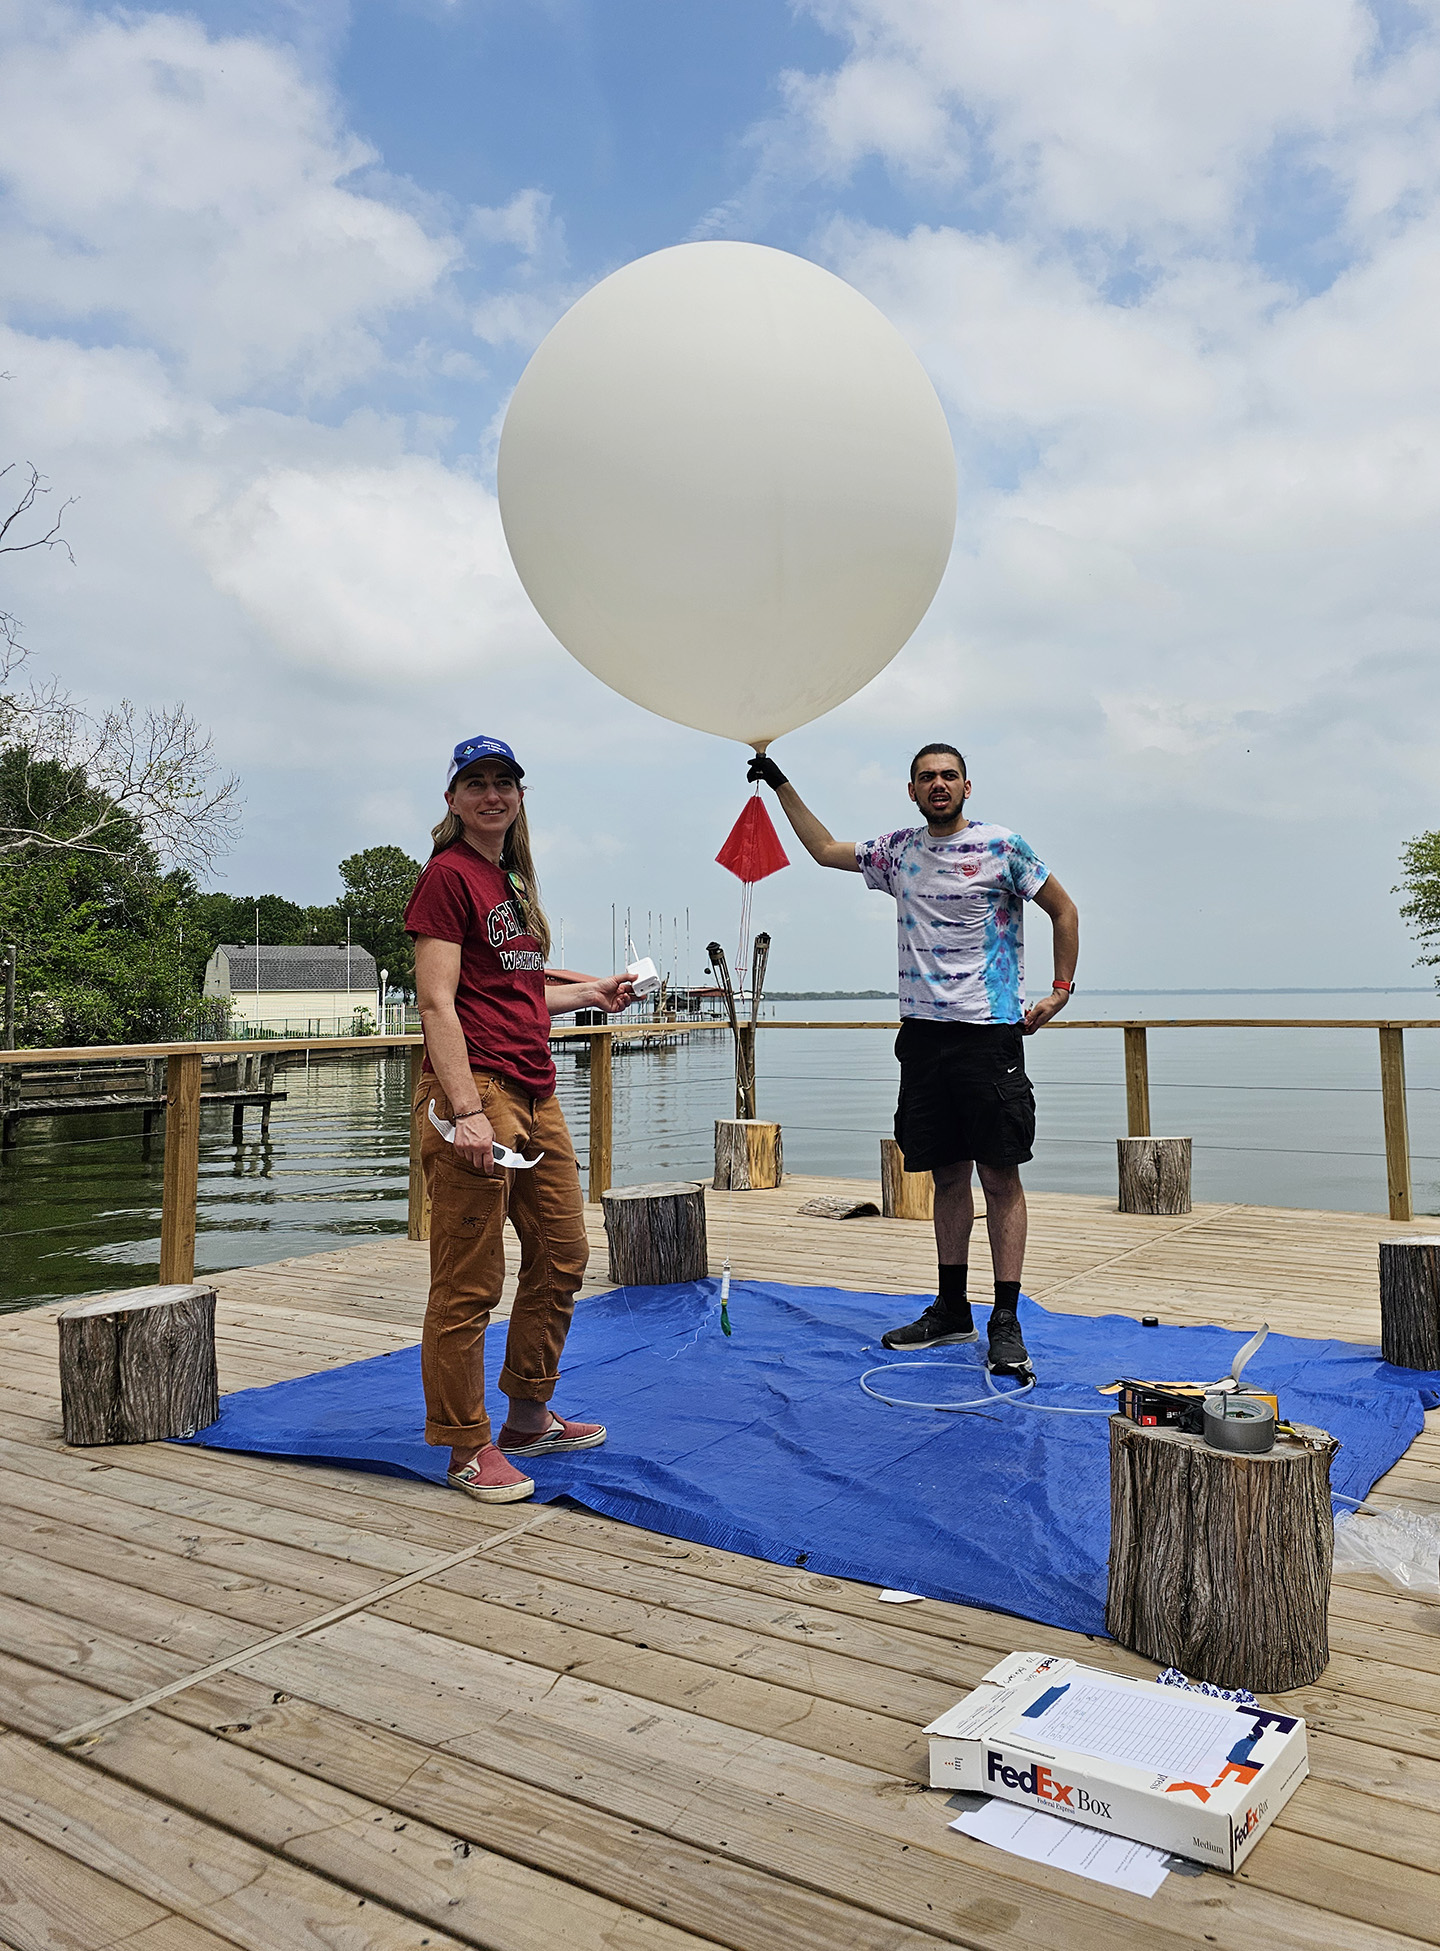 CWU team holds a weather balloon